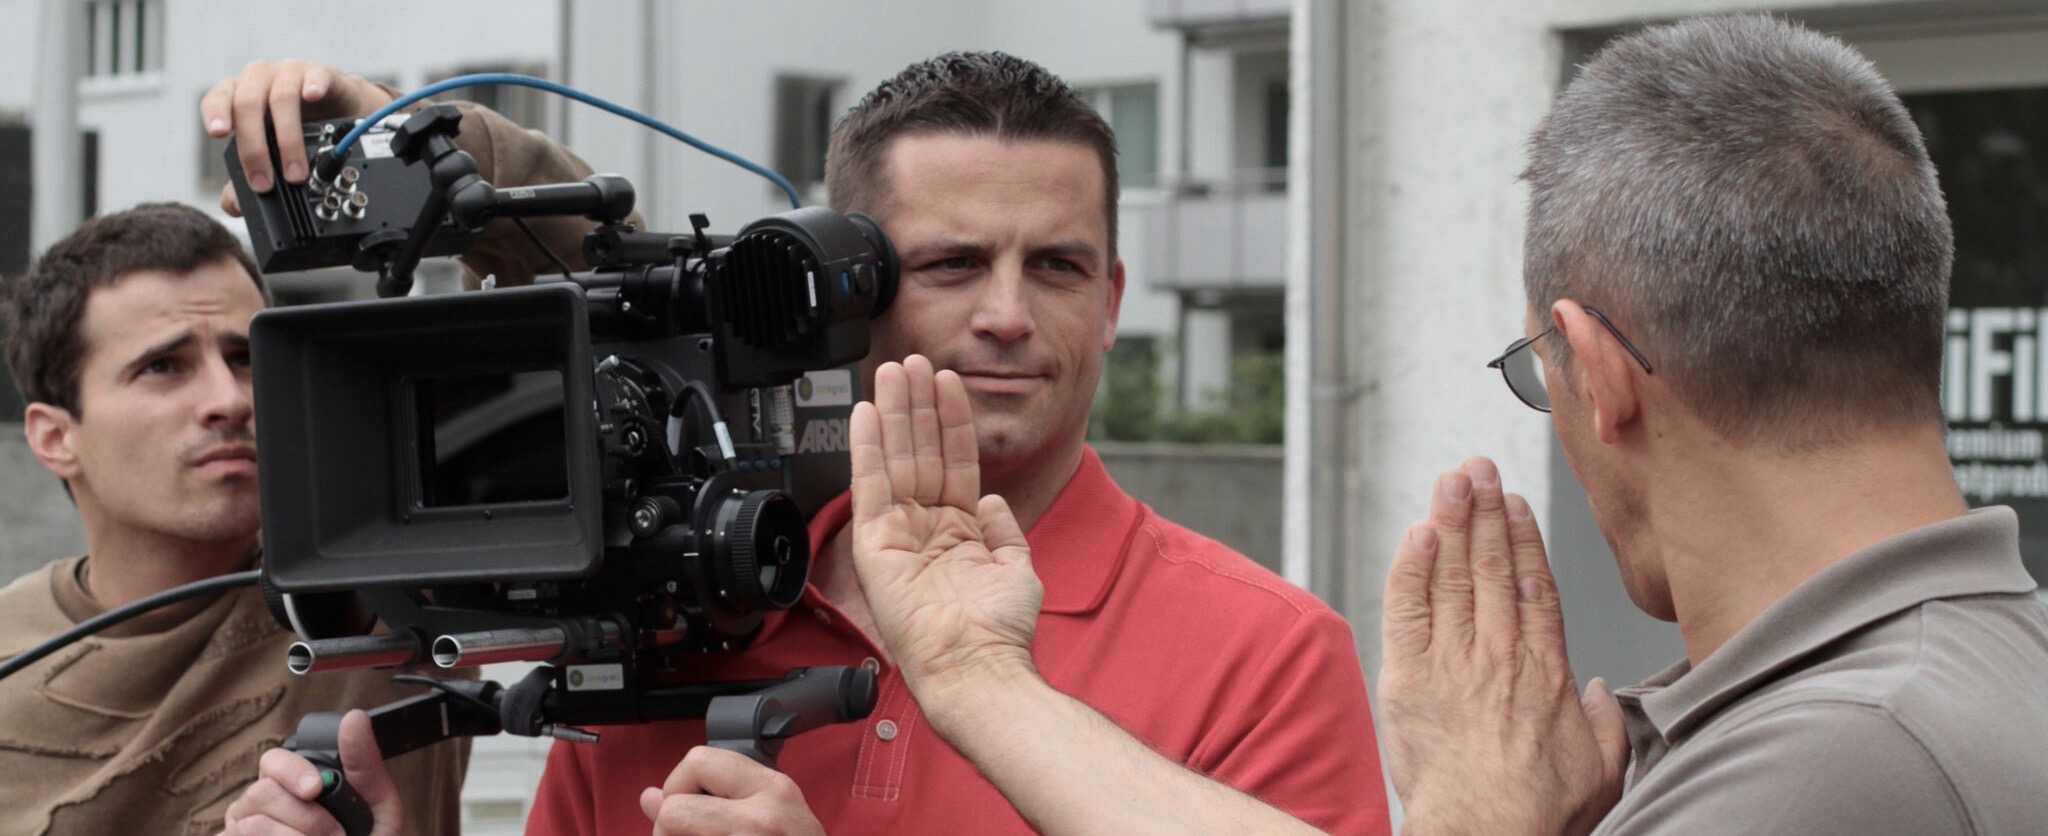 Shooting on location in Zurich, Switzerland with DP Paolo Ferrari A.I.C.